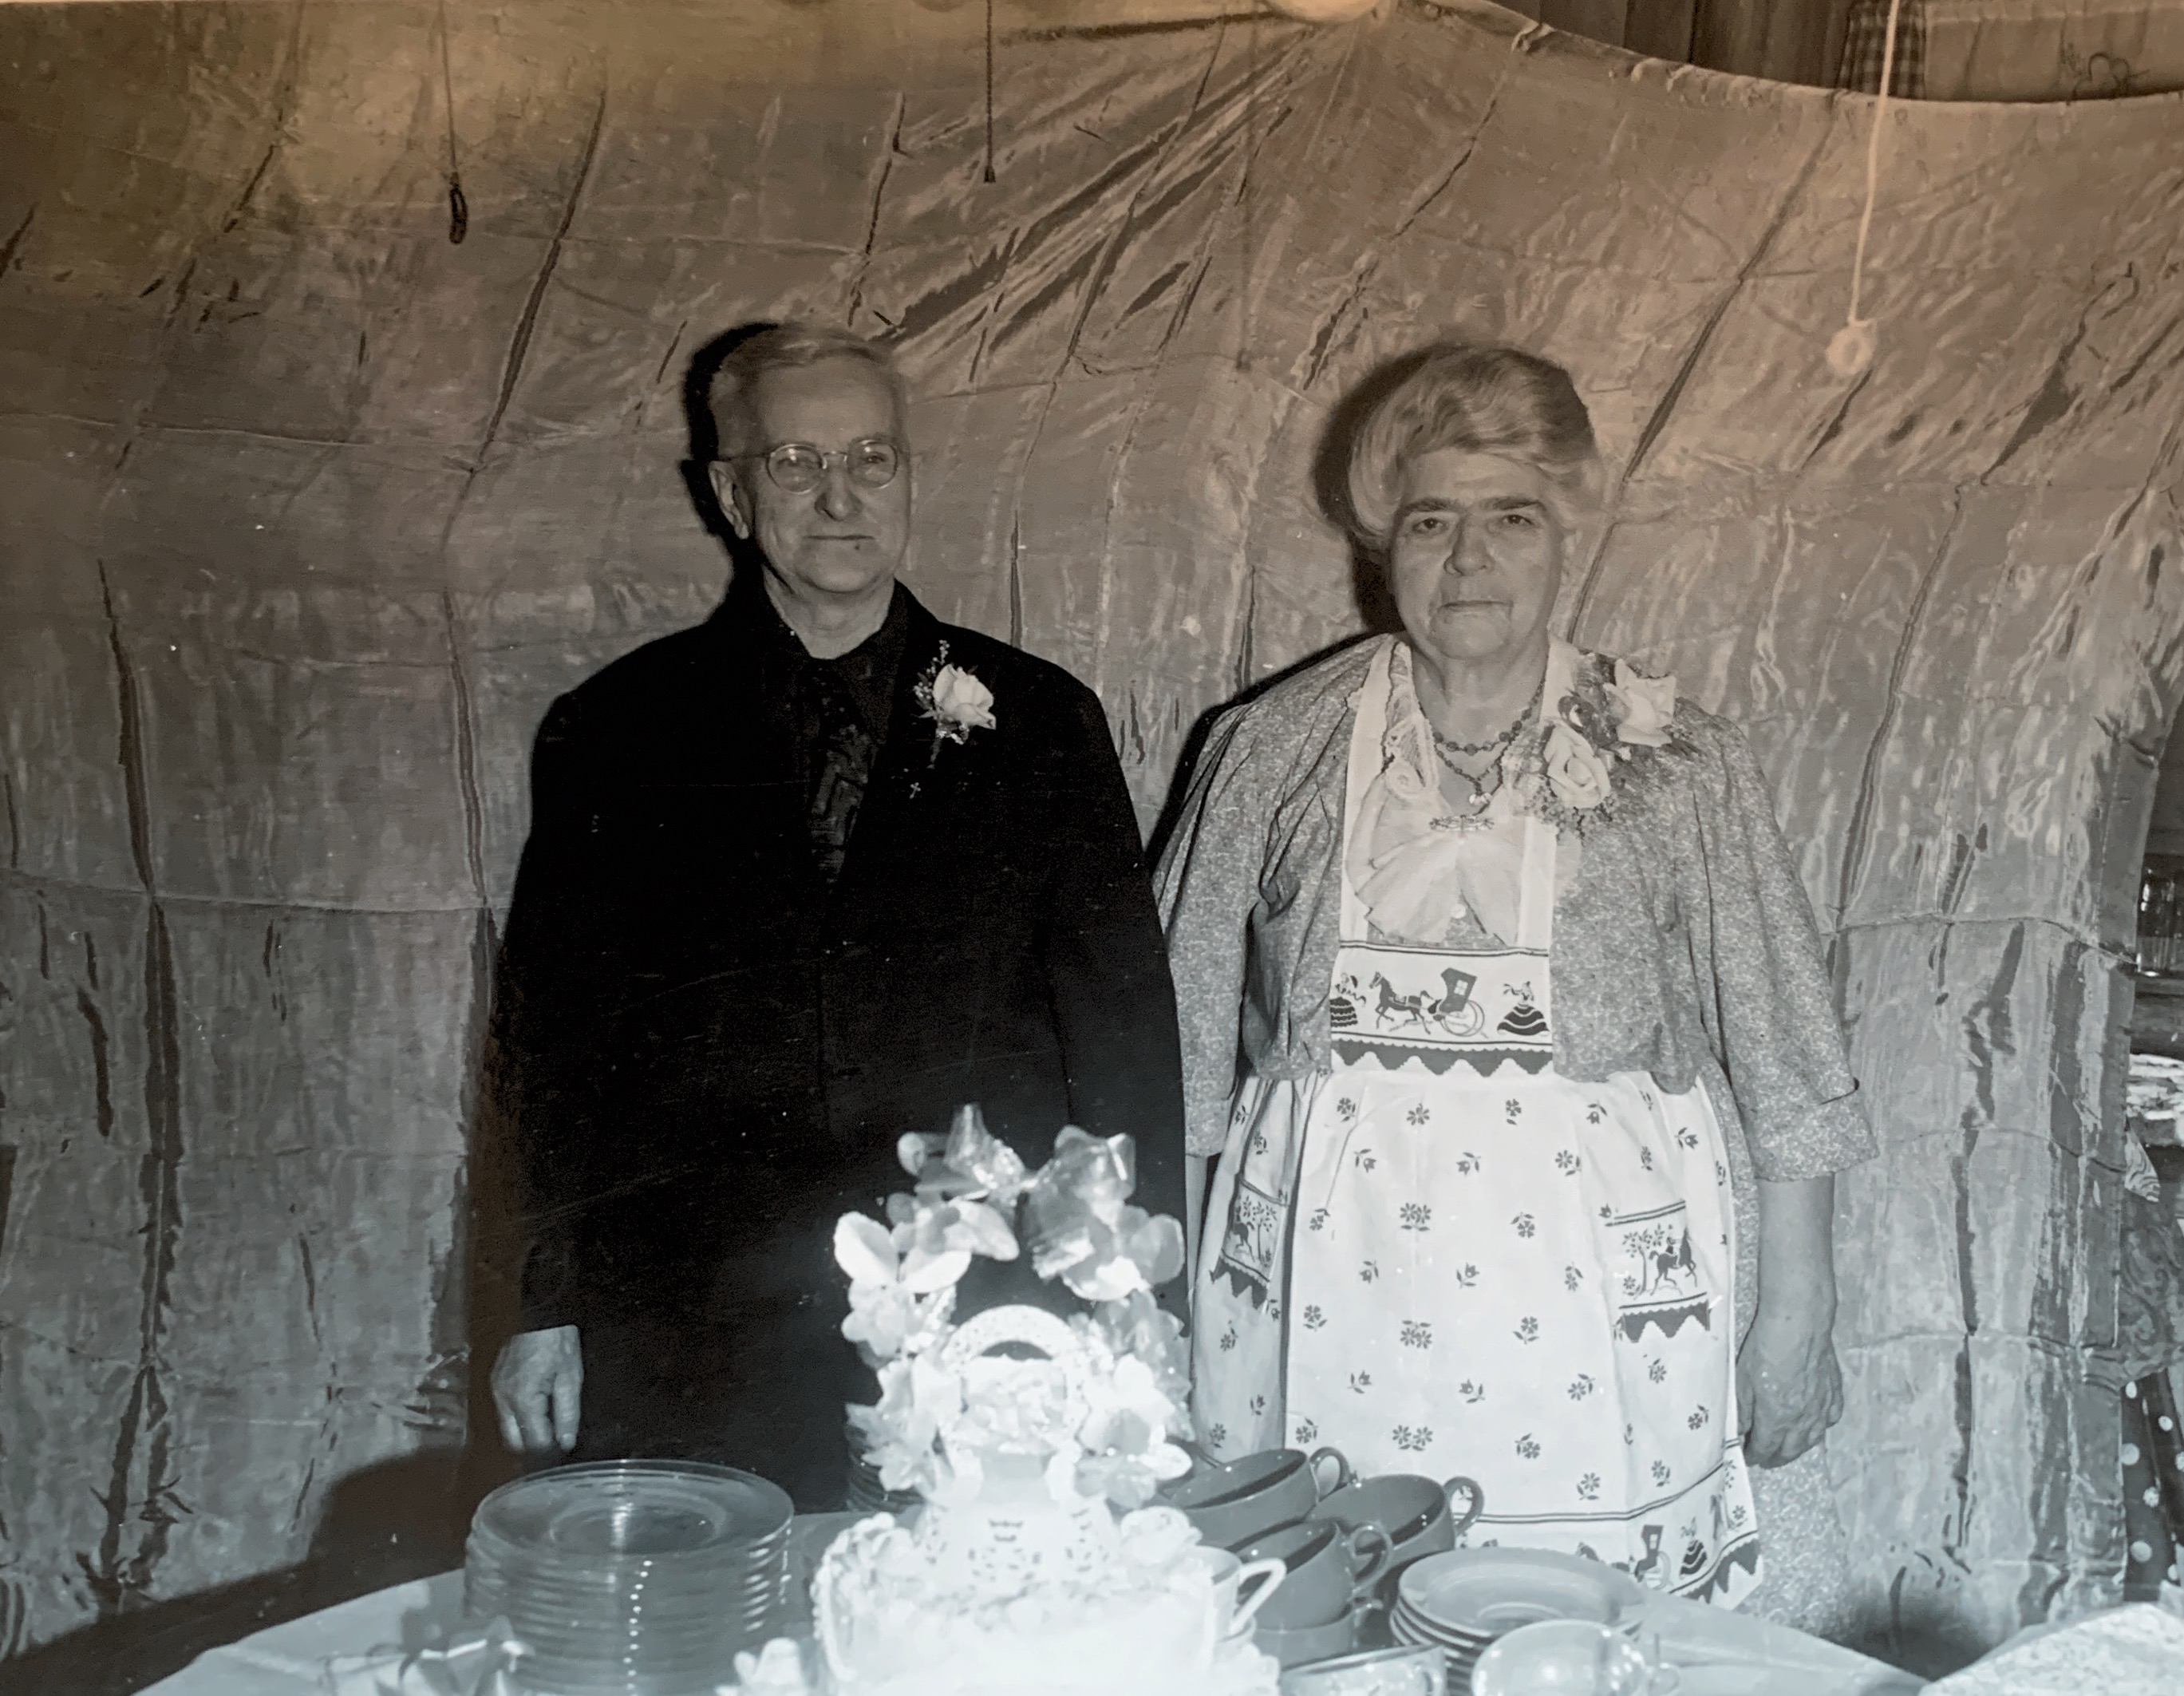 50th Golden wedding anniversary of Andrew and Mary Bayer Feb 12 1956